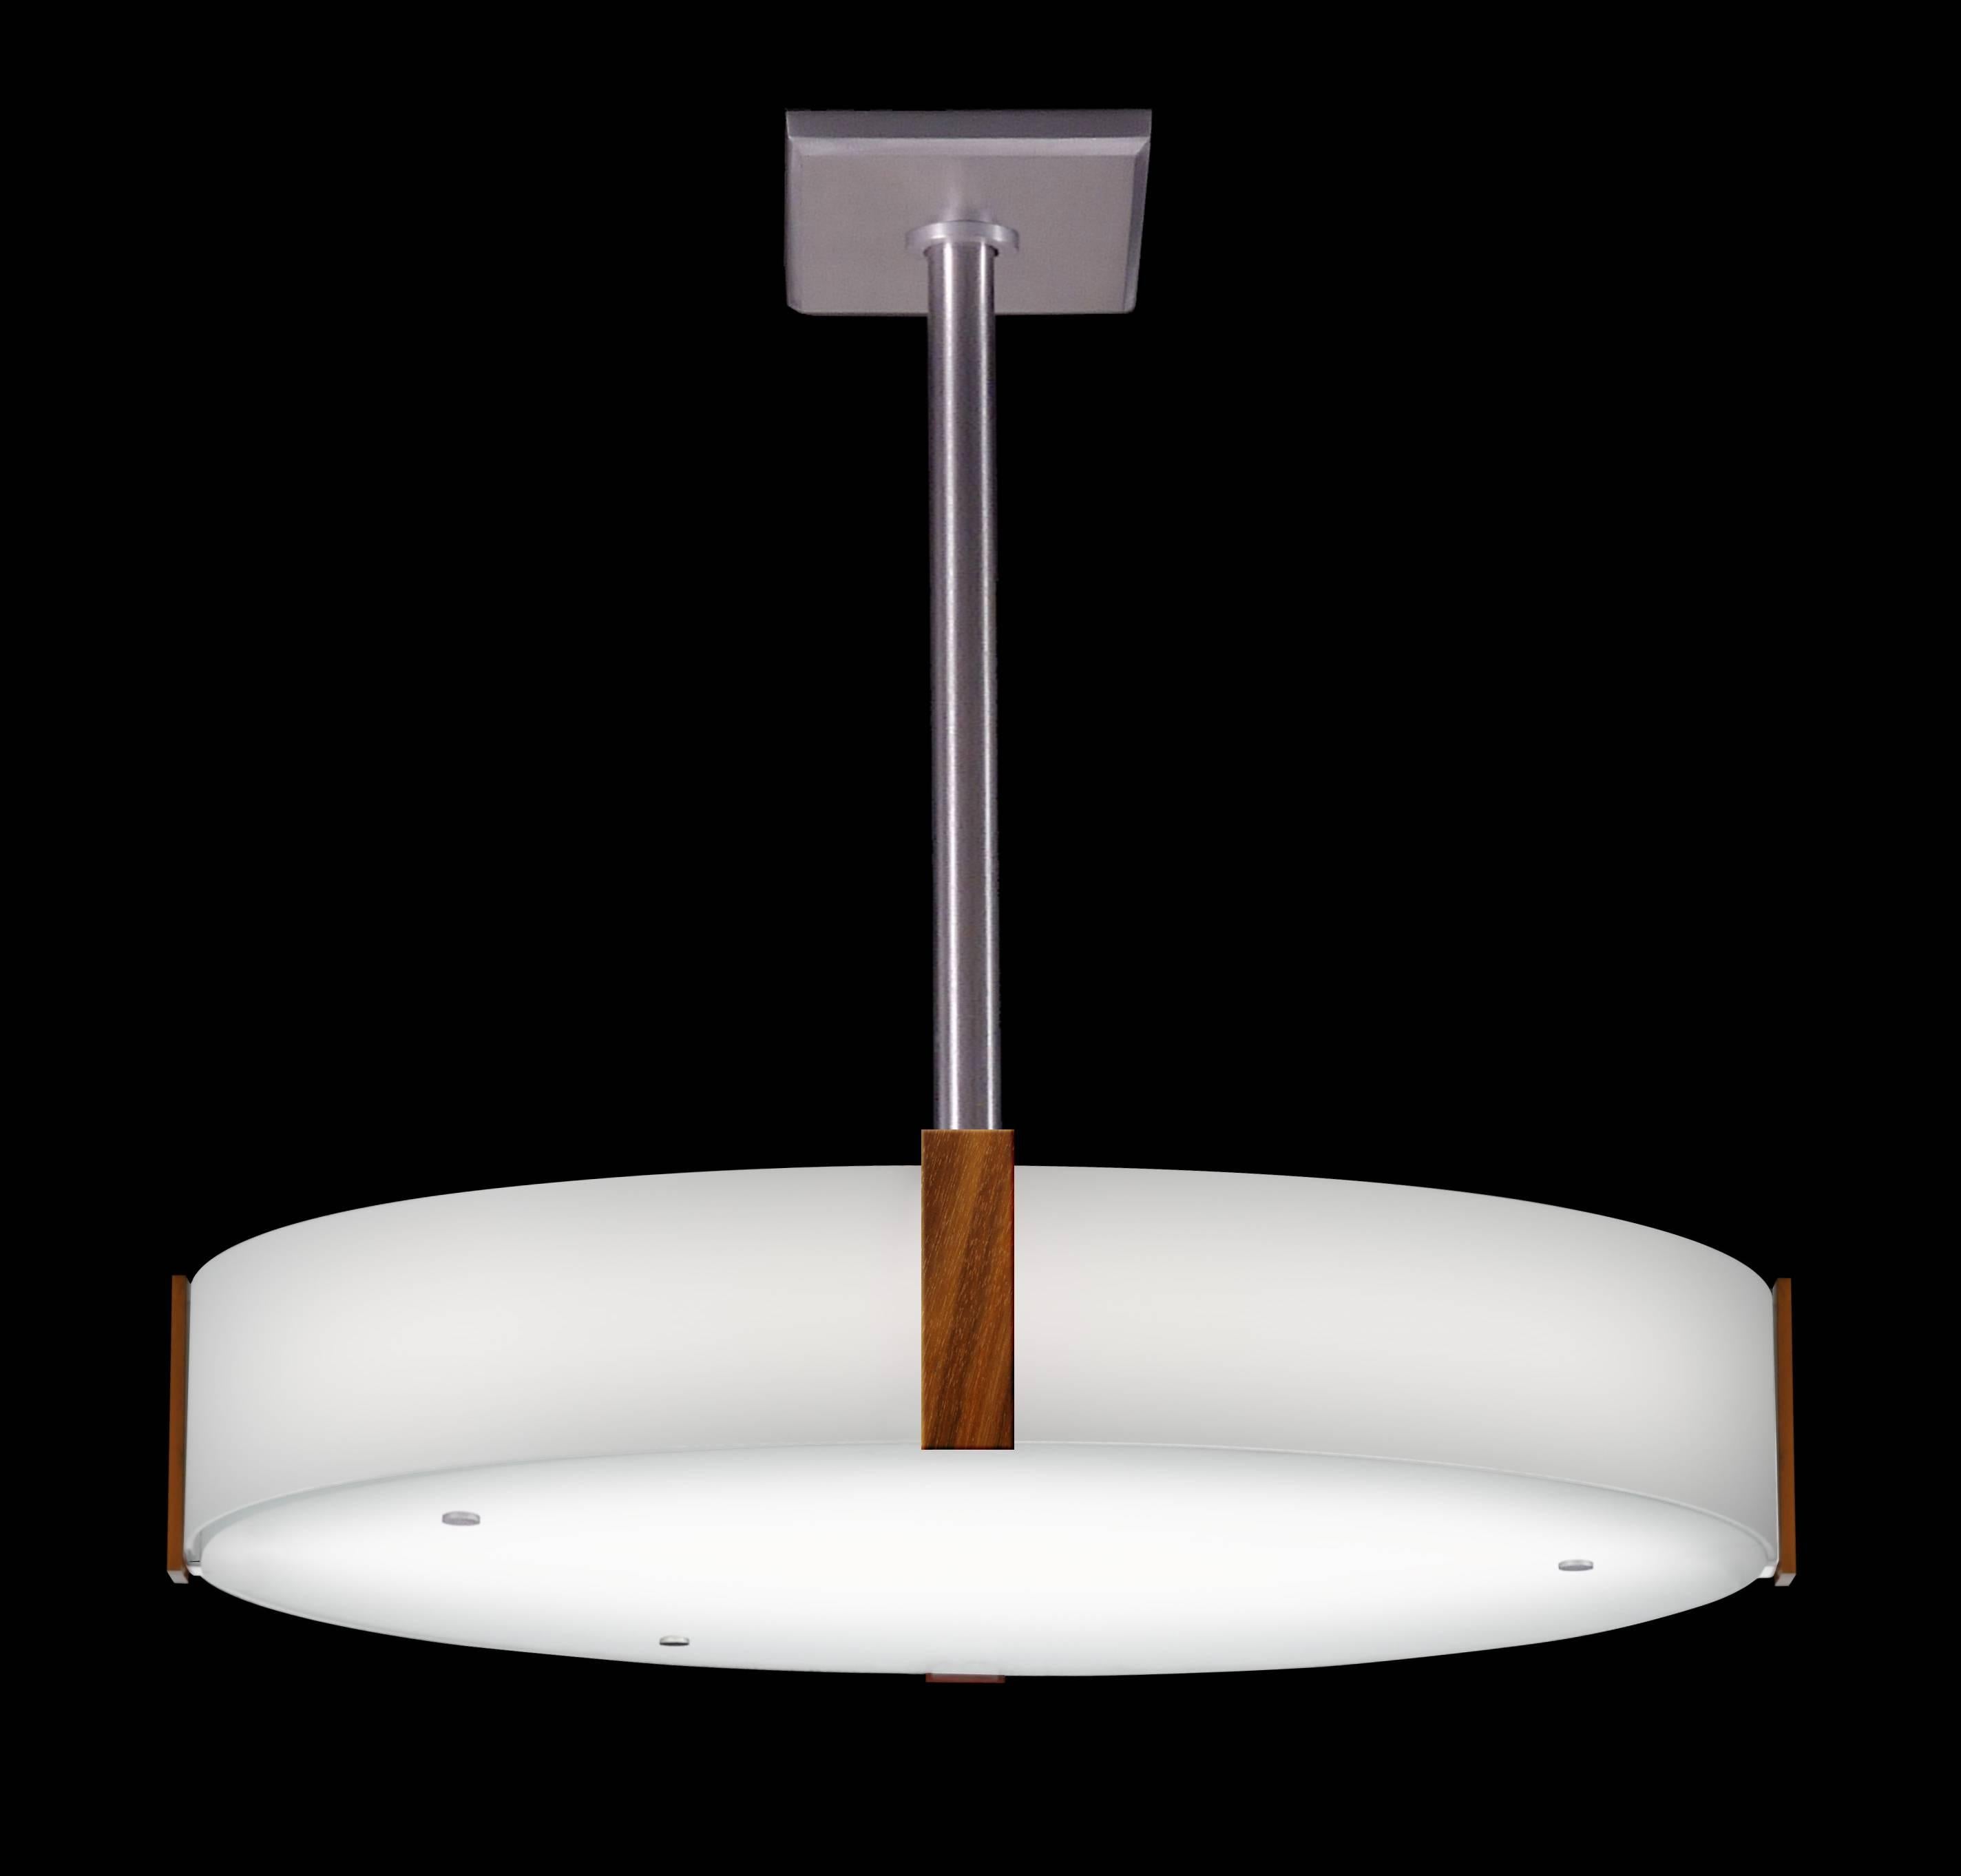 Round glass drum pendant light with curved glass sides and wood vertical details. Classic simple design lines in the manner of Mid-Century Modern. LED or incandescent lamping. Satin aluminum metalwork.

Architect, Sandy Littman of Duesenberg LTD. 